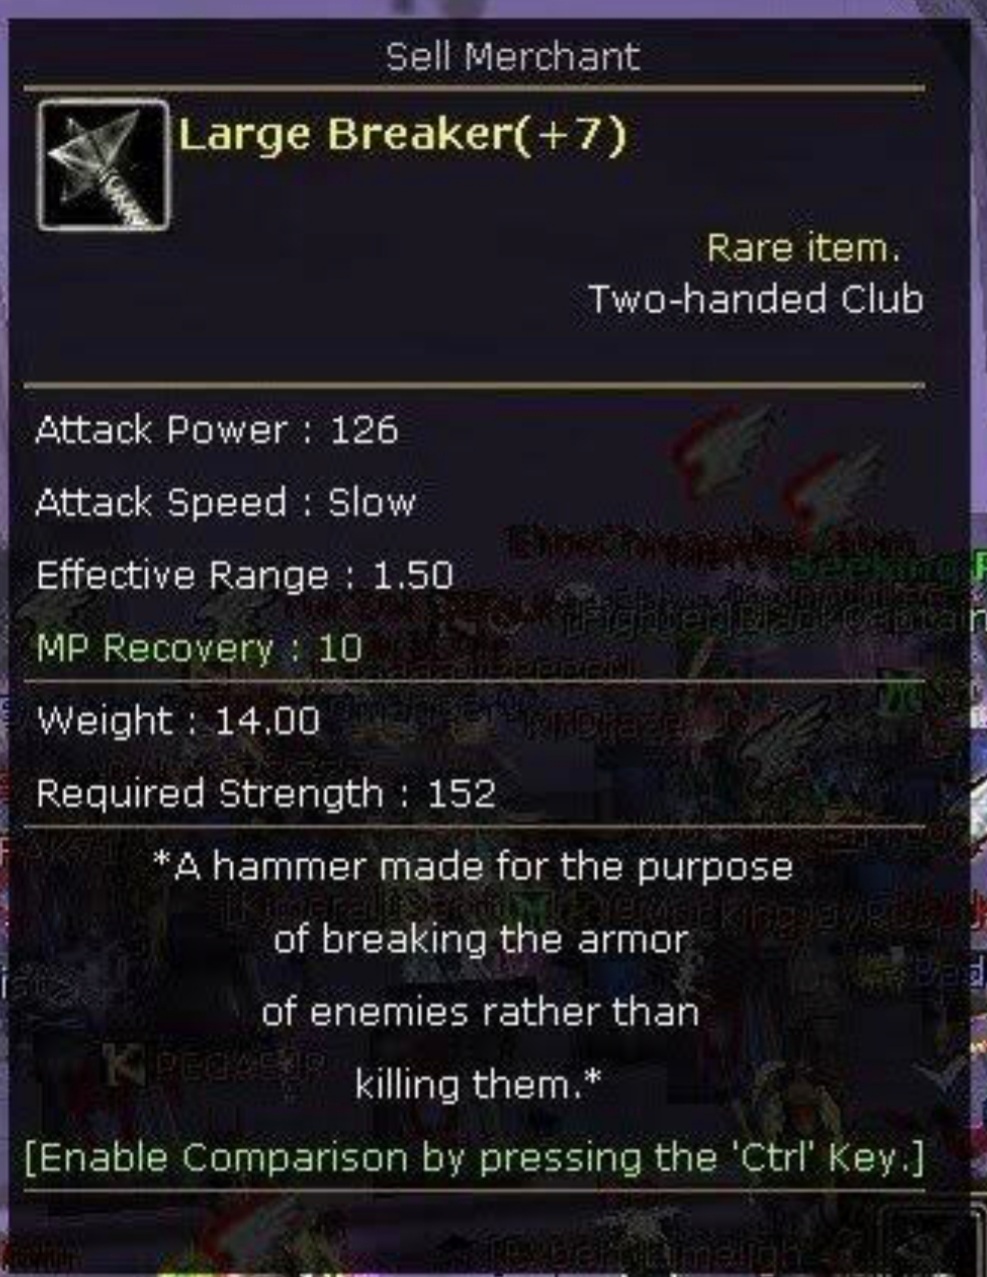 +7LARGE BREAKER MP RECOVERY 